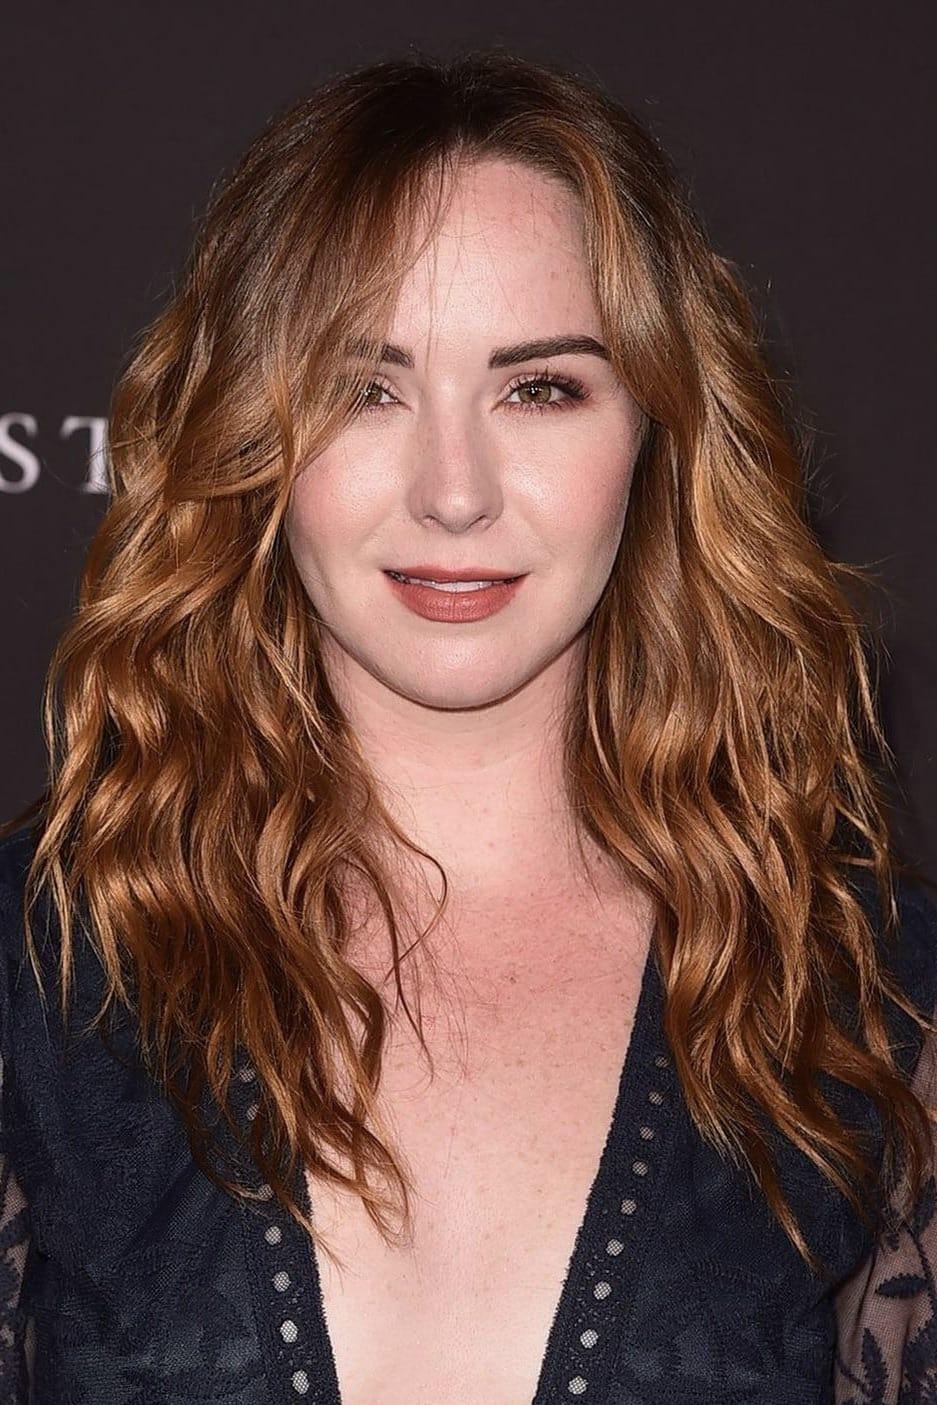 Camryn Grimes poster